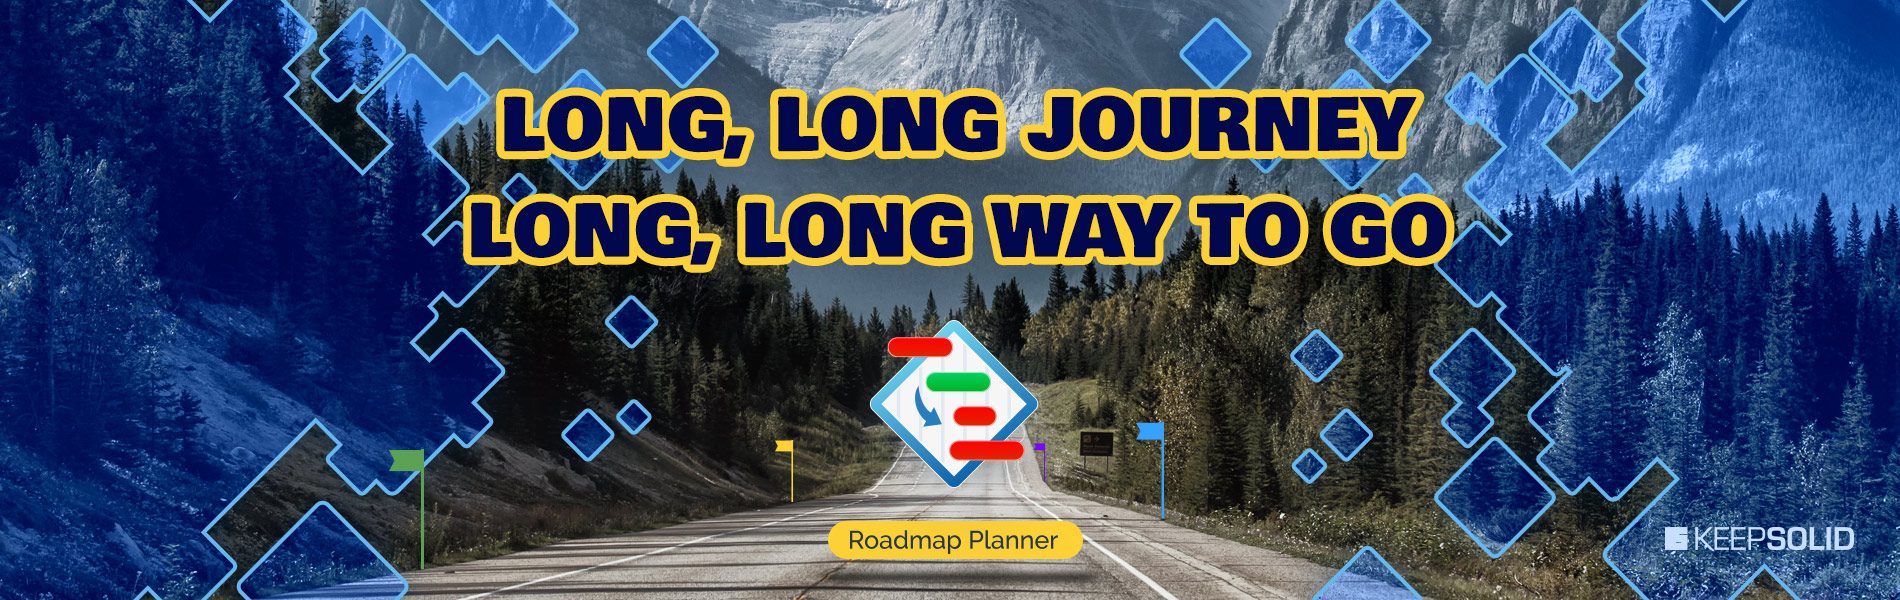 Product Roadmap to the great mountain of business success.